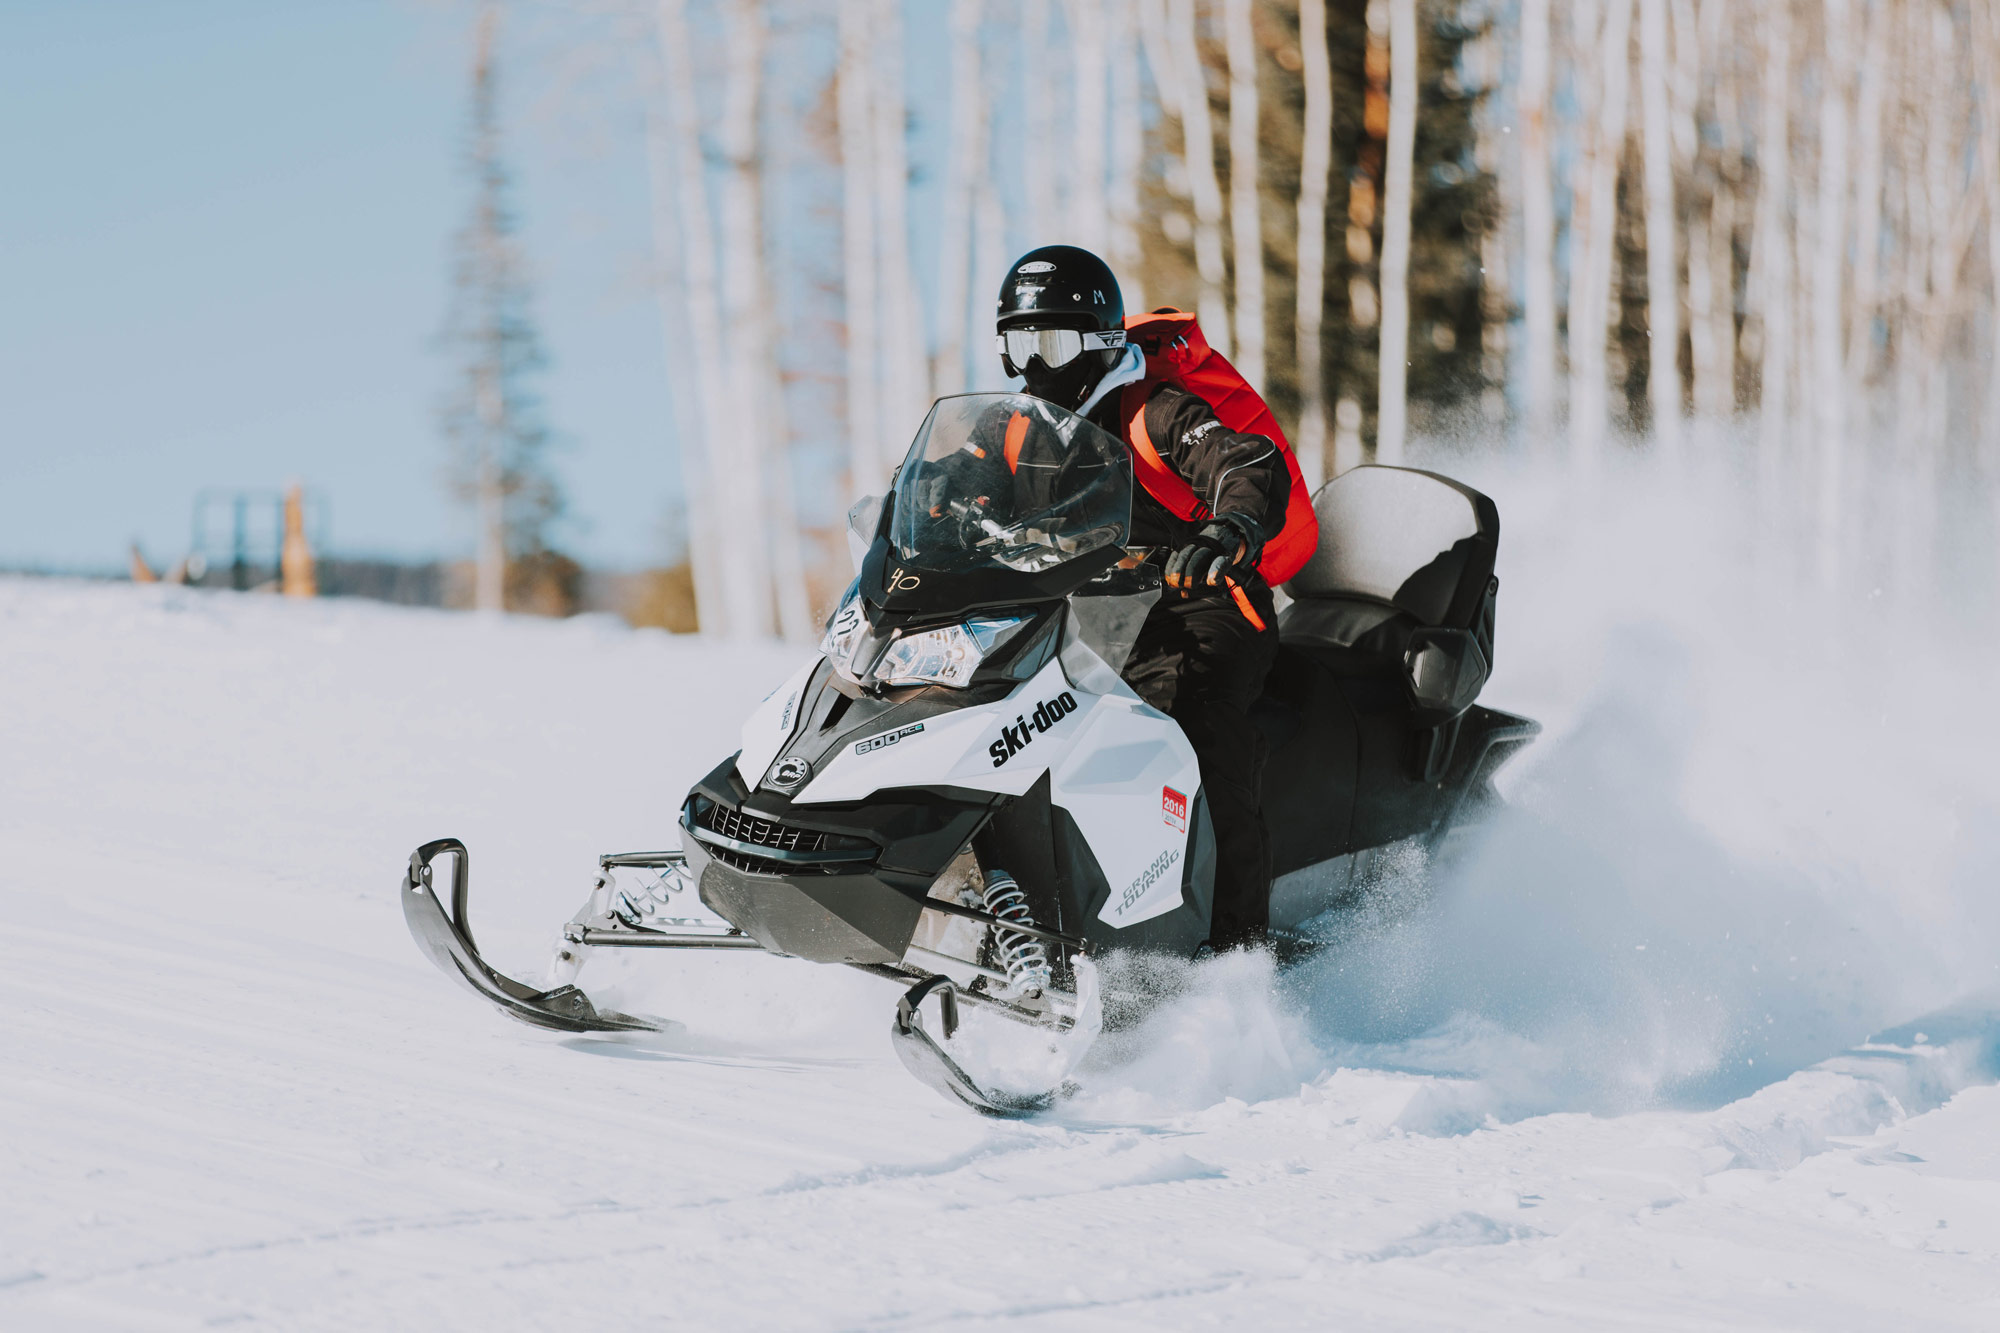 Crowfoot Mountain: Experience Crowfoot and Pukeashan, an exceptional mountain playground for snowmobilers and ATV’s. The trails are managed in partnership with the Crowfoot Mountain Snowmobile Club.